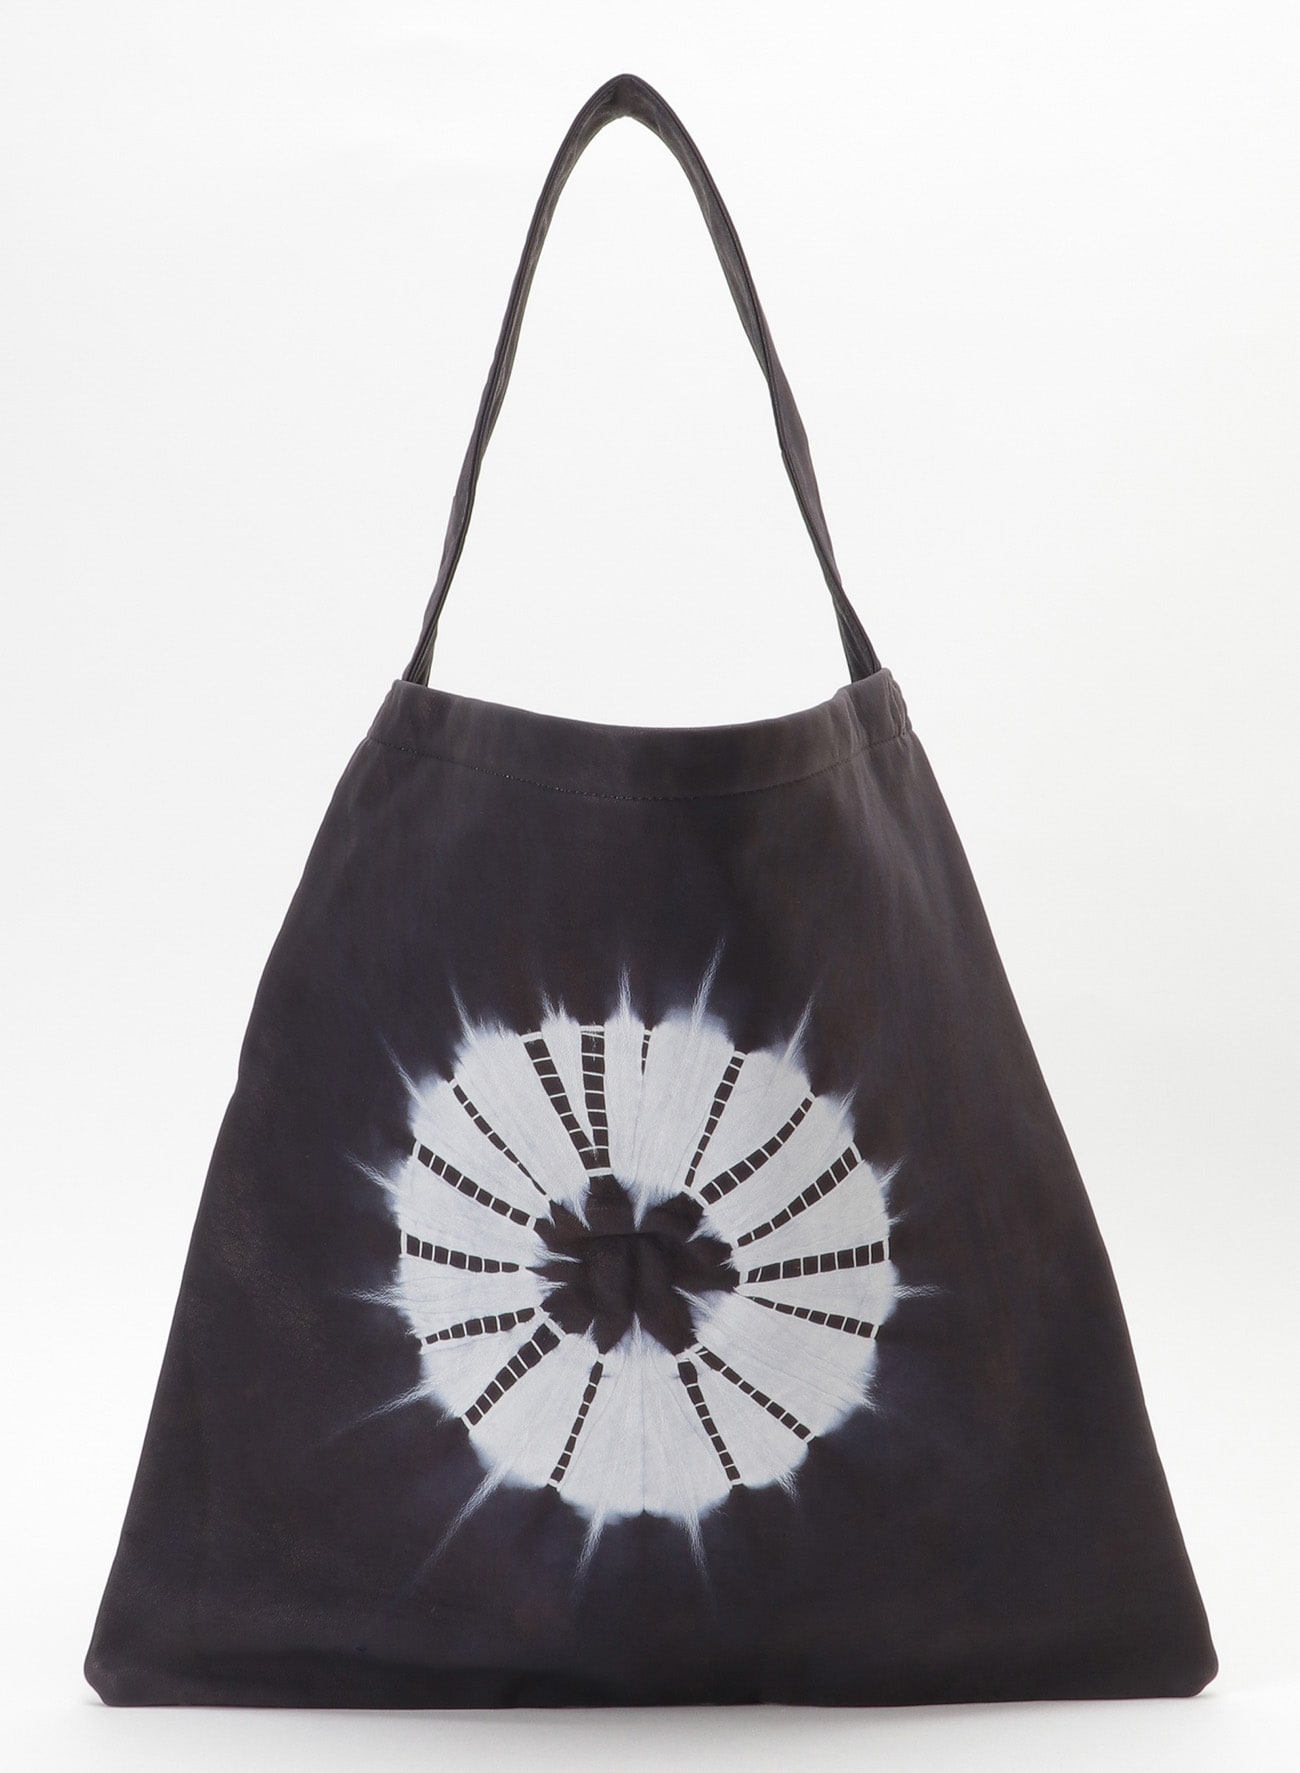 TIE-DYED LEATHER FLAT TOTE BAG